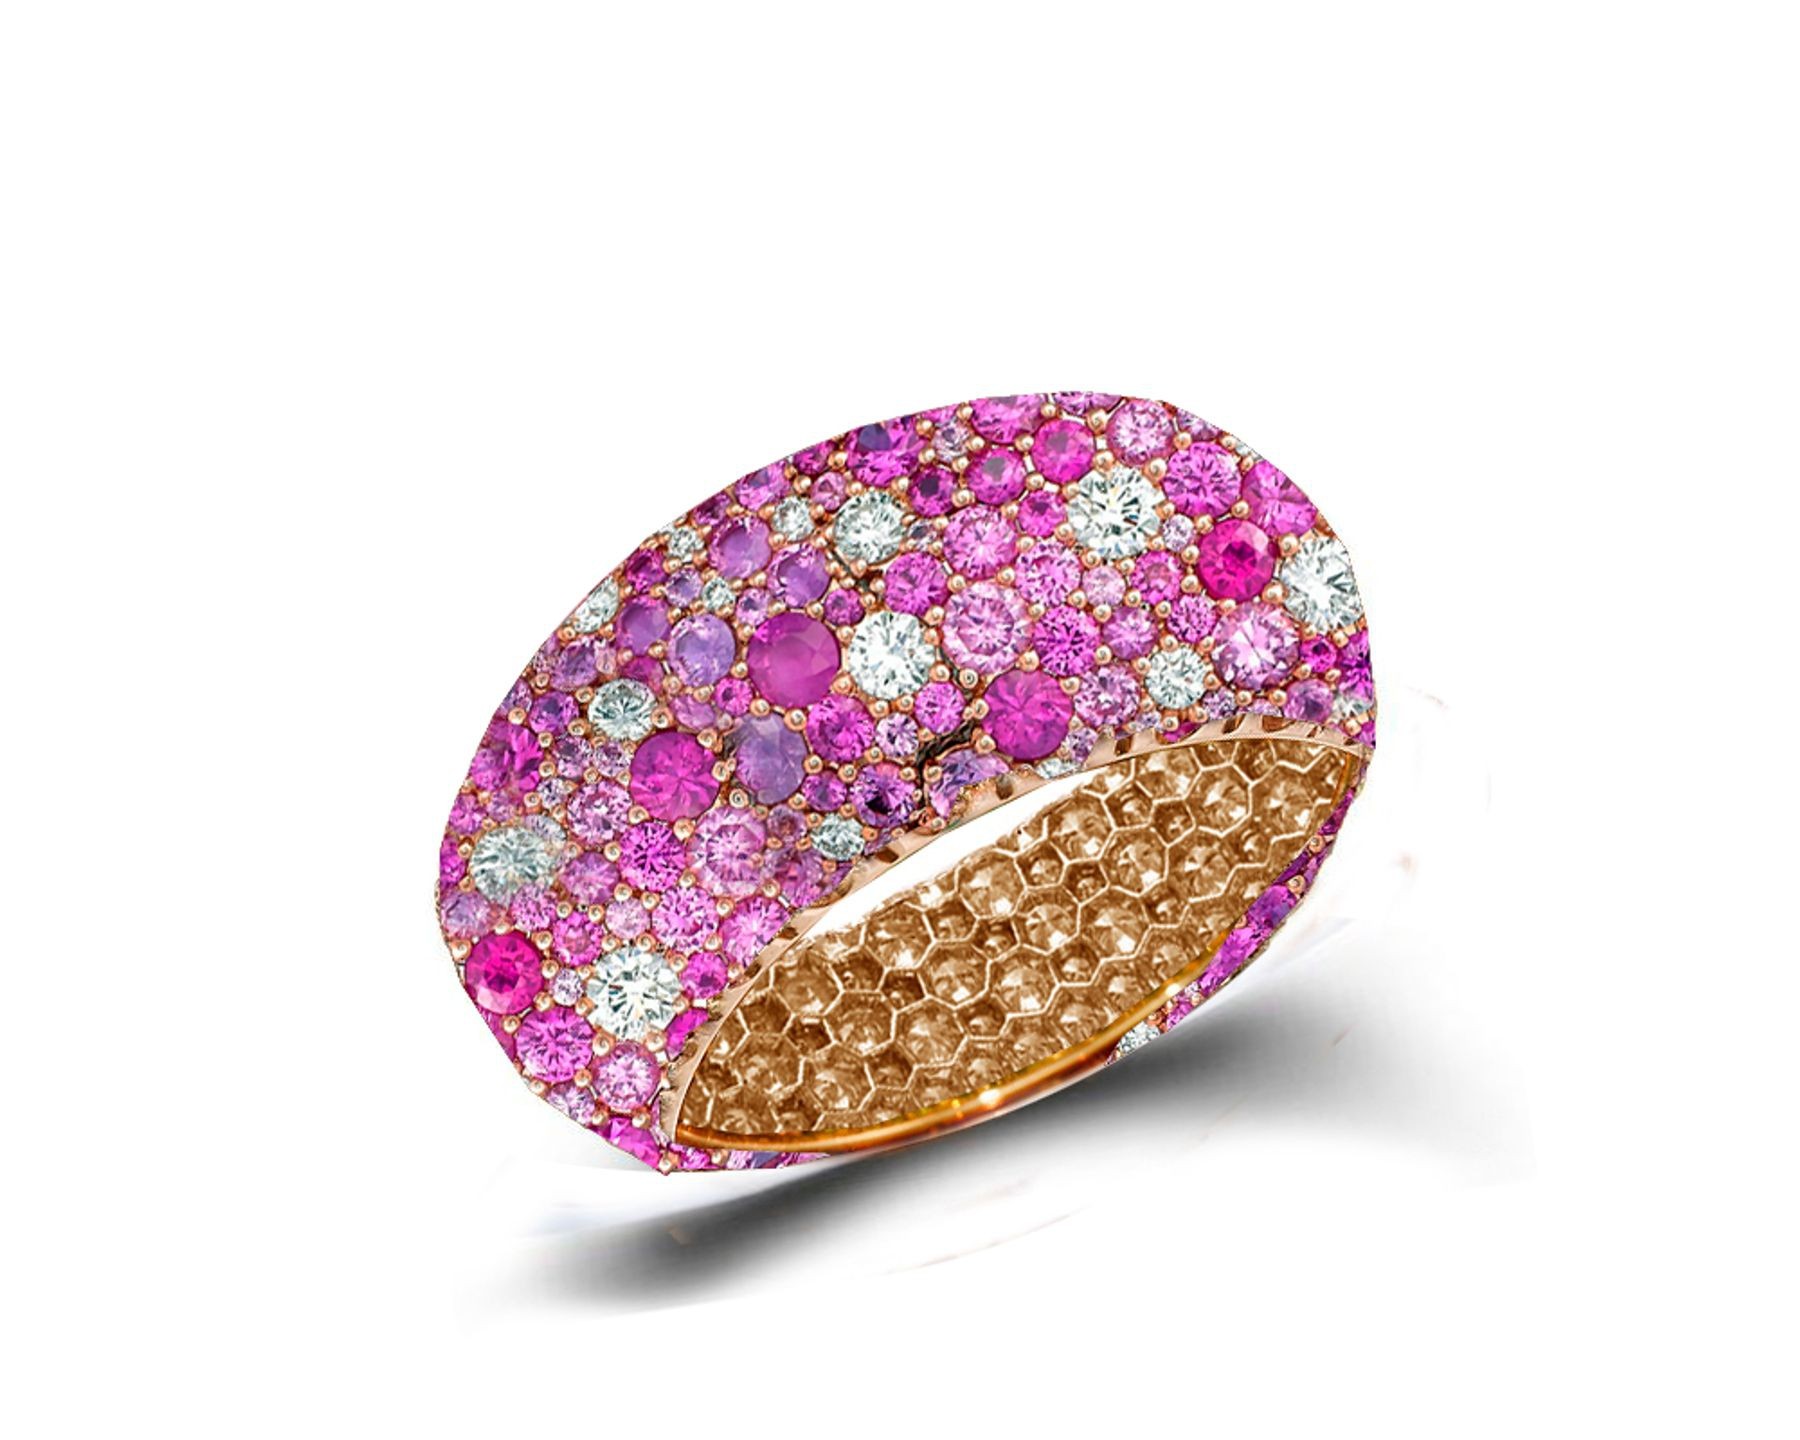 Eternity Ring with Diamonds & Pink Sapphires in Gold or Platinum